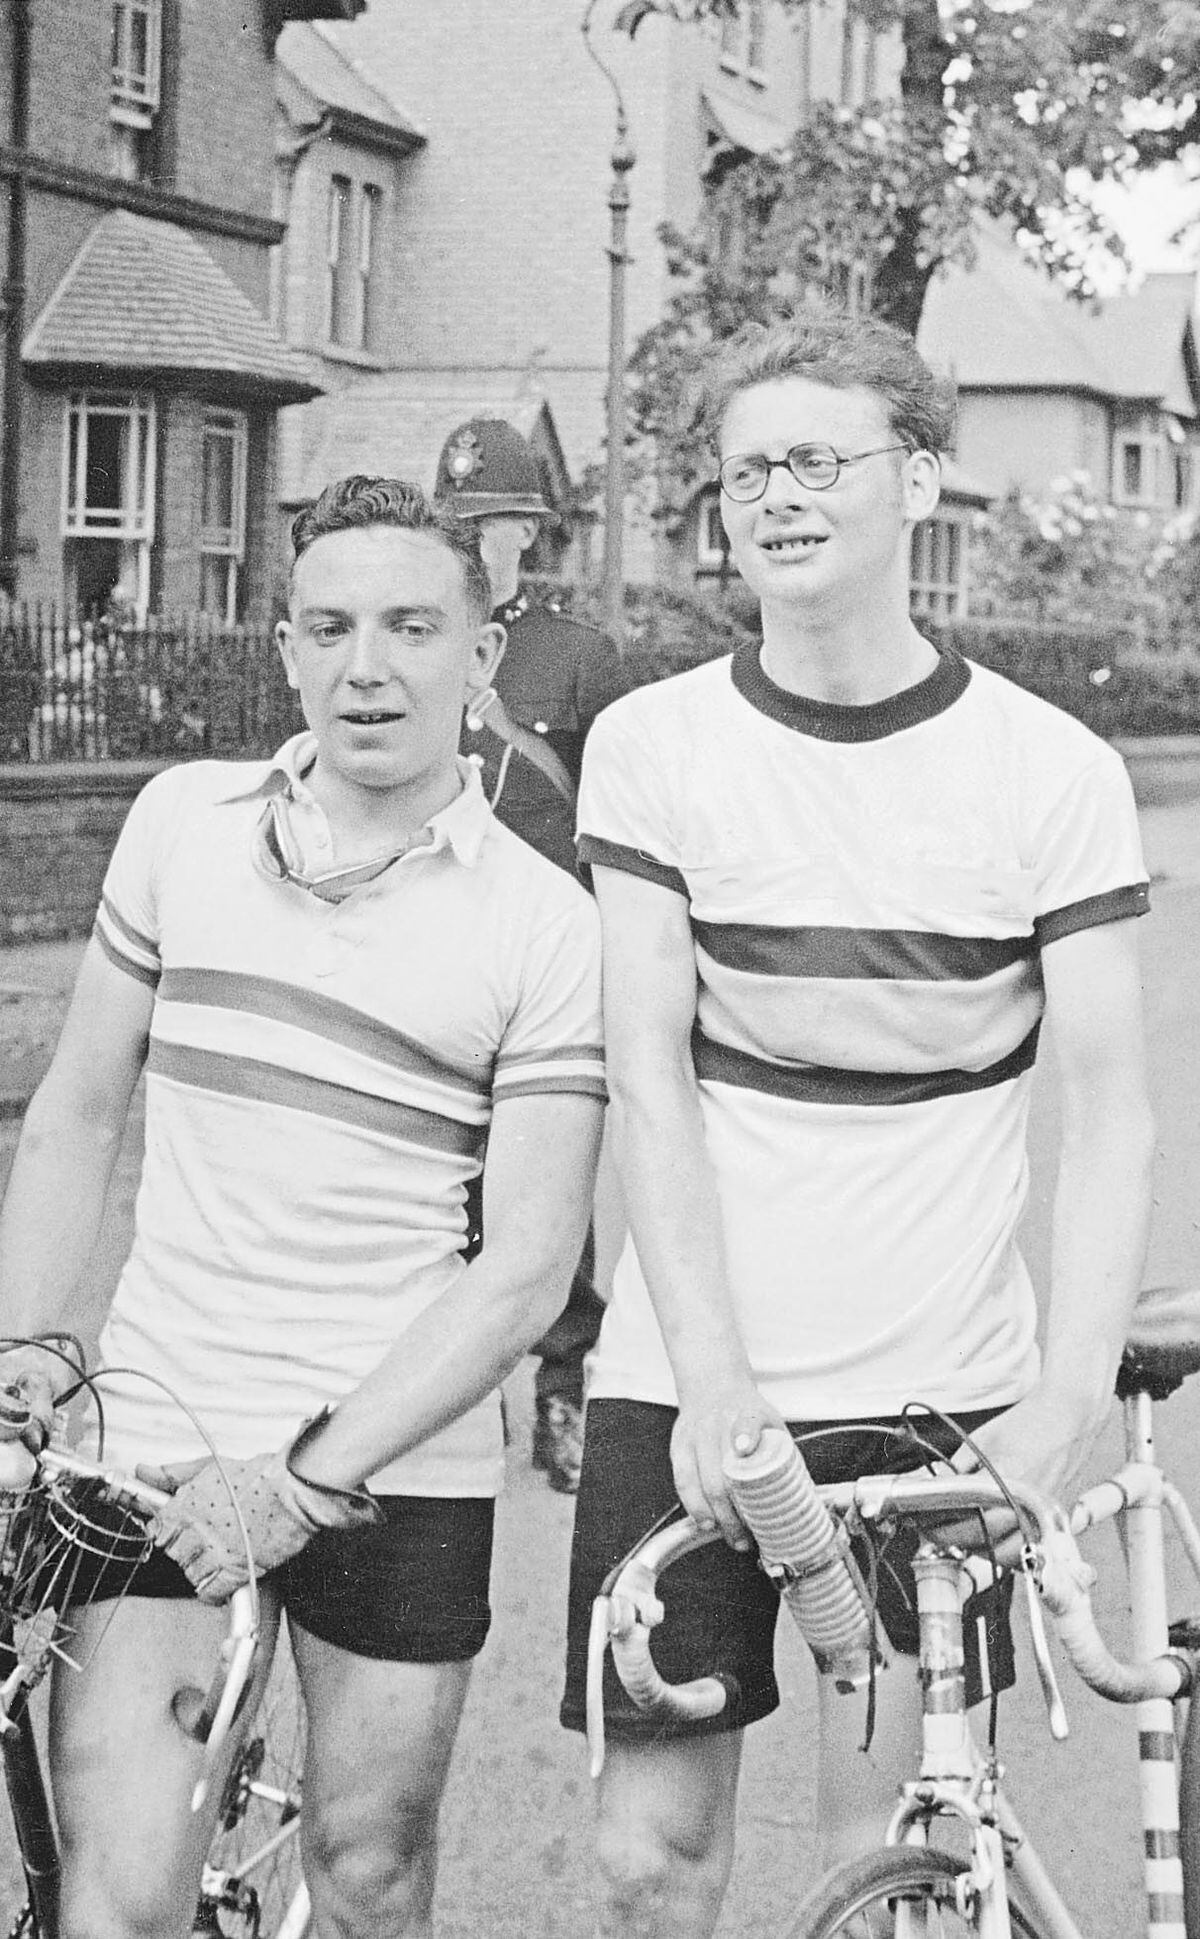 Albert Price and Cecil Anslow took the top two places in the 1942 Llangollen-Wolverhampton cycle race